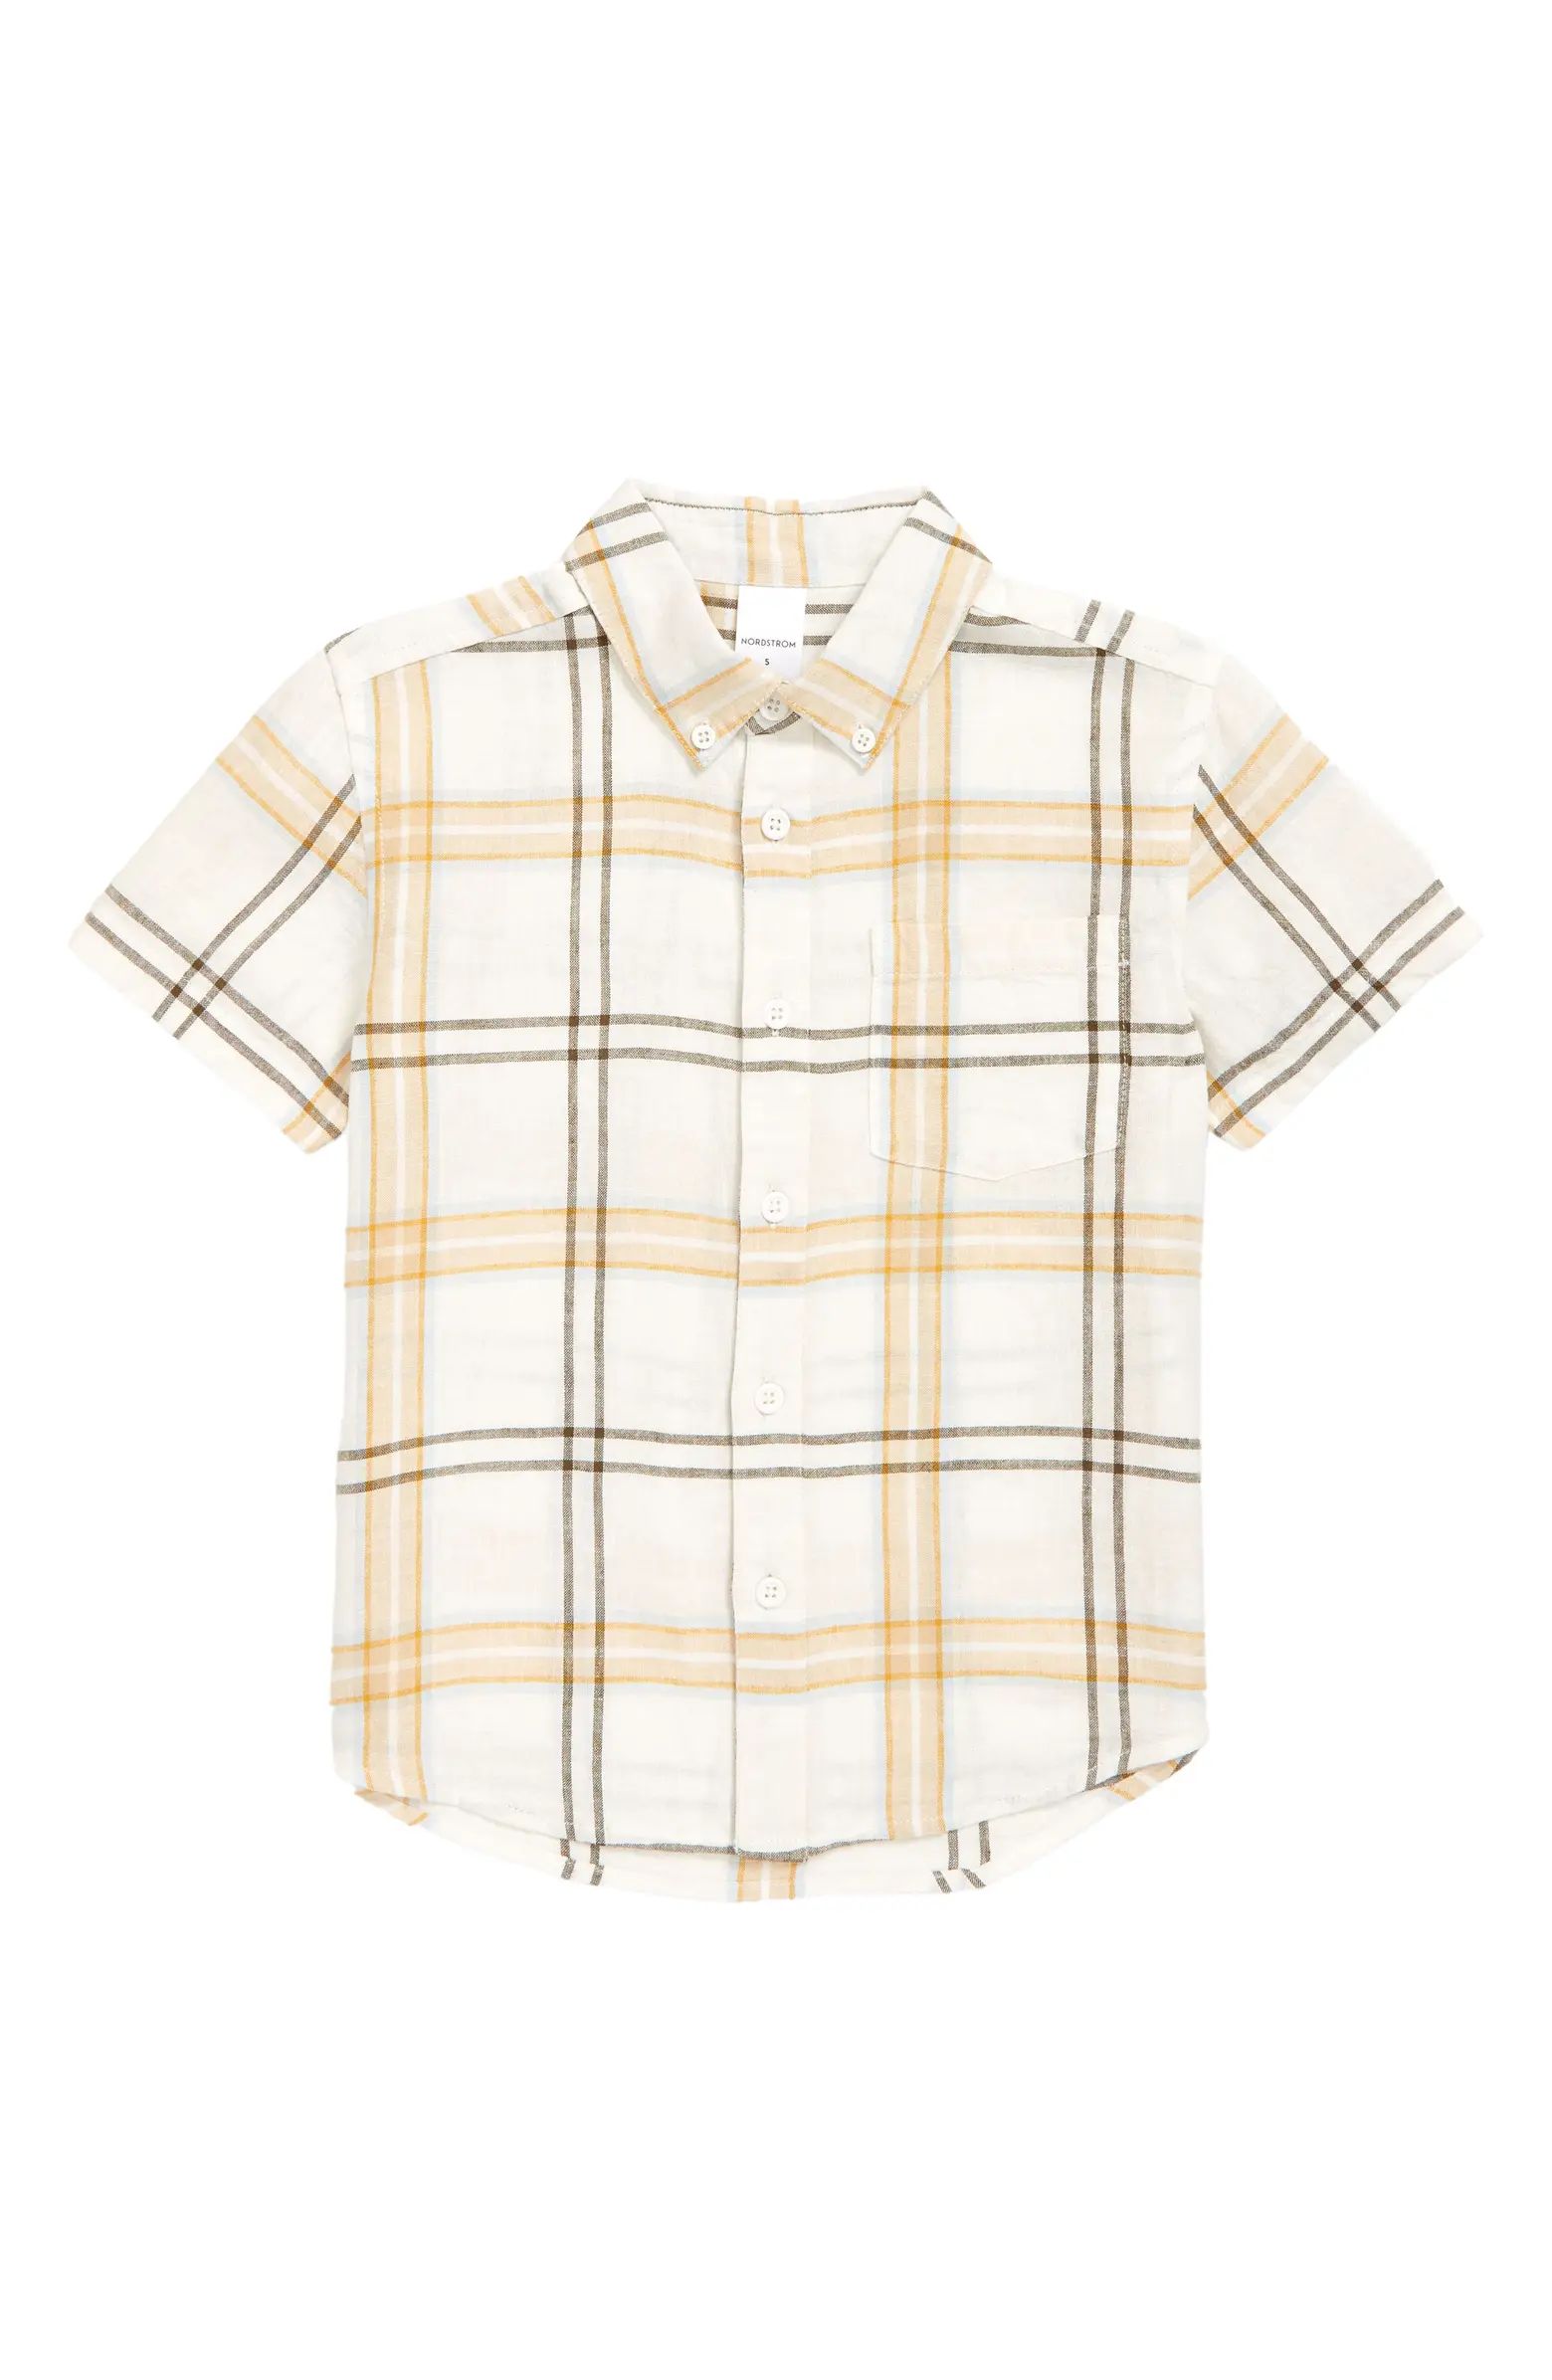 Kids' Matching Family Moments Plaid Button-Down Shirt | Nordstrom